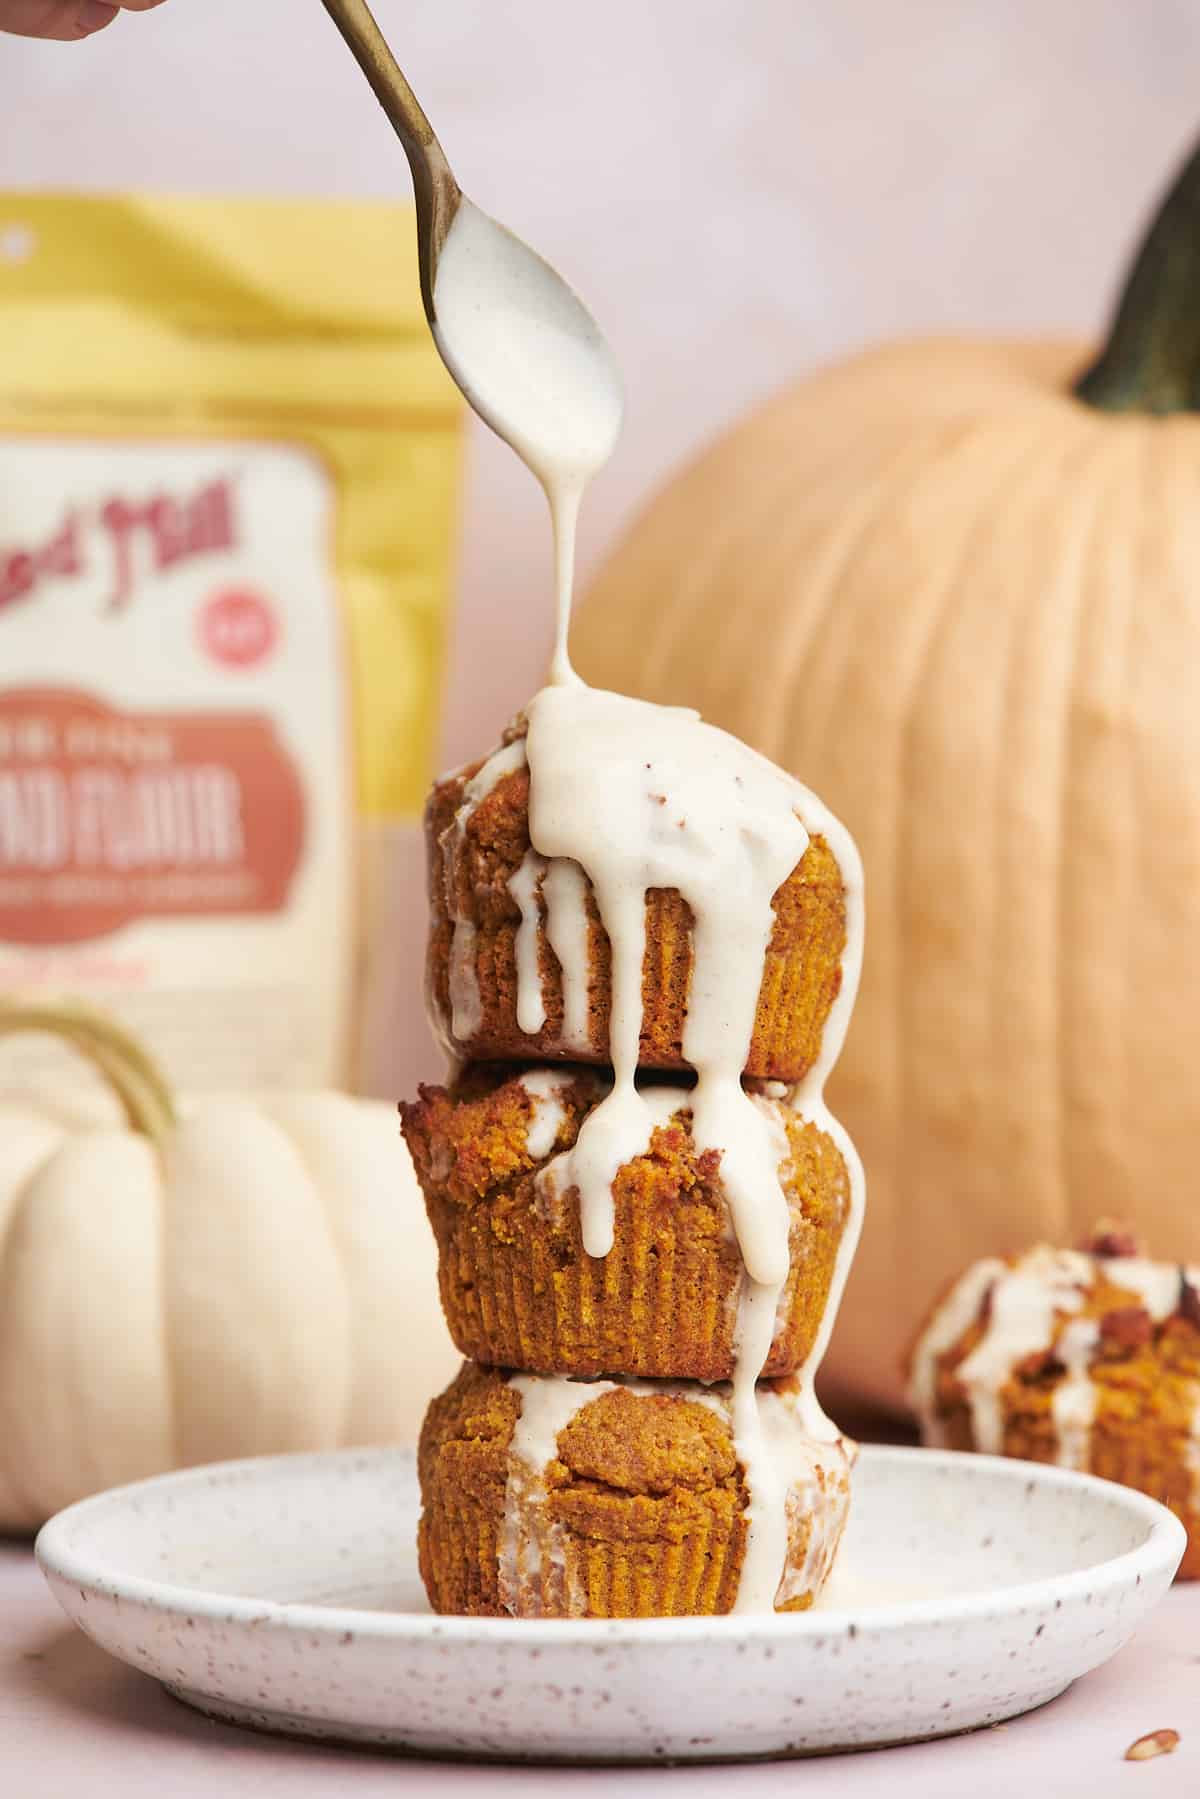 bag of bob's red mill almond flour in the background of a stack of pumpkin muffins being drizzled with cream cheese glaze. Large pumpkins are in the background.